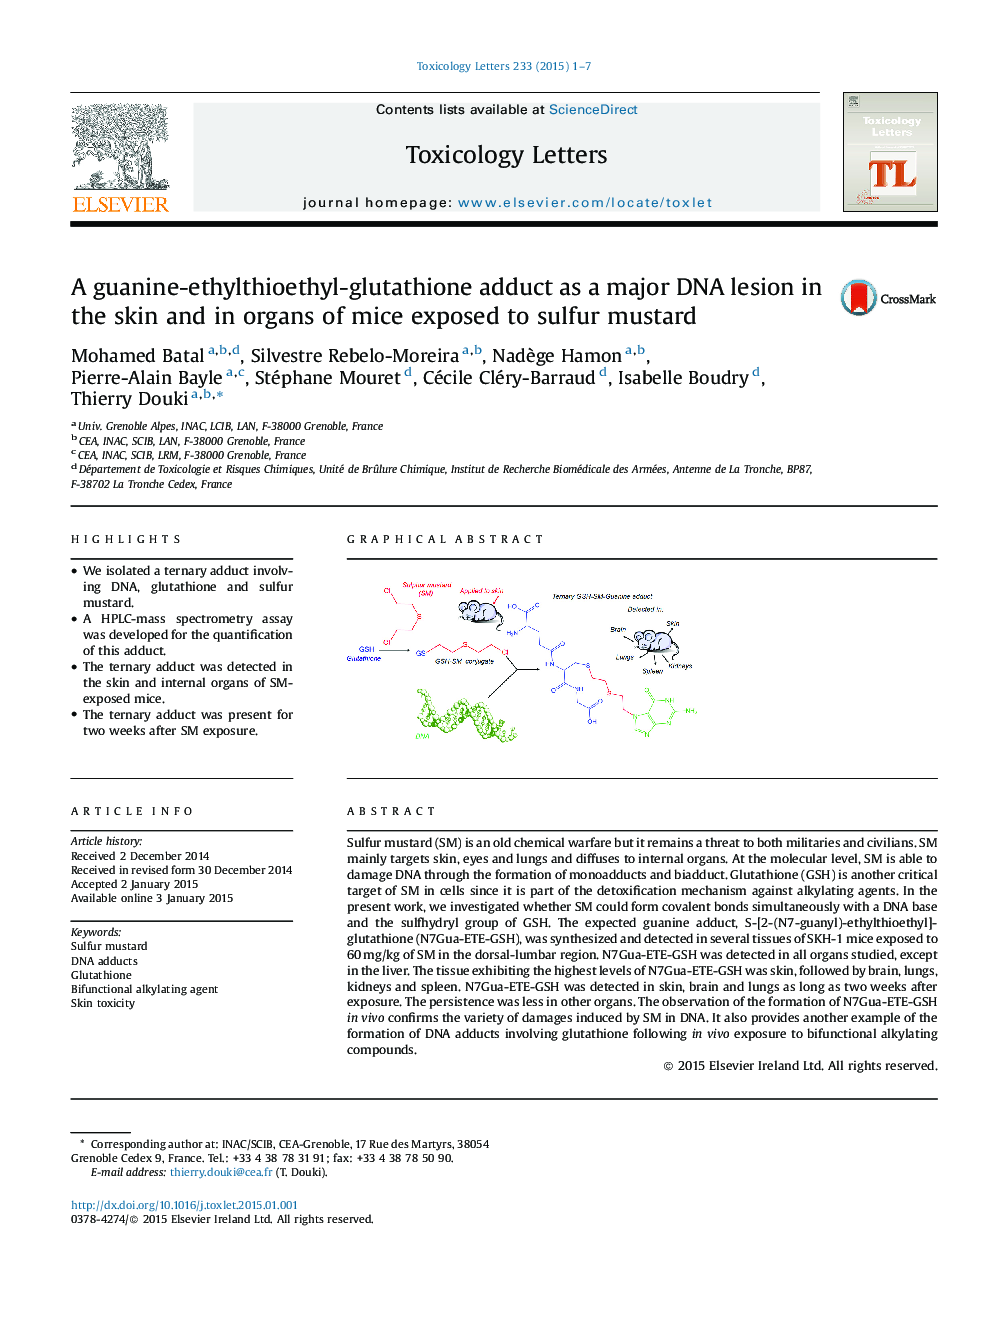 A guanine-ethylthioethyl-glutathione adduct as a major DNA lesion in the skin and in organs of mice exposed to sulfur mustard